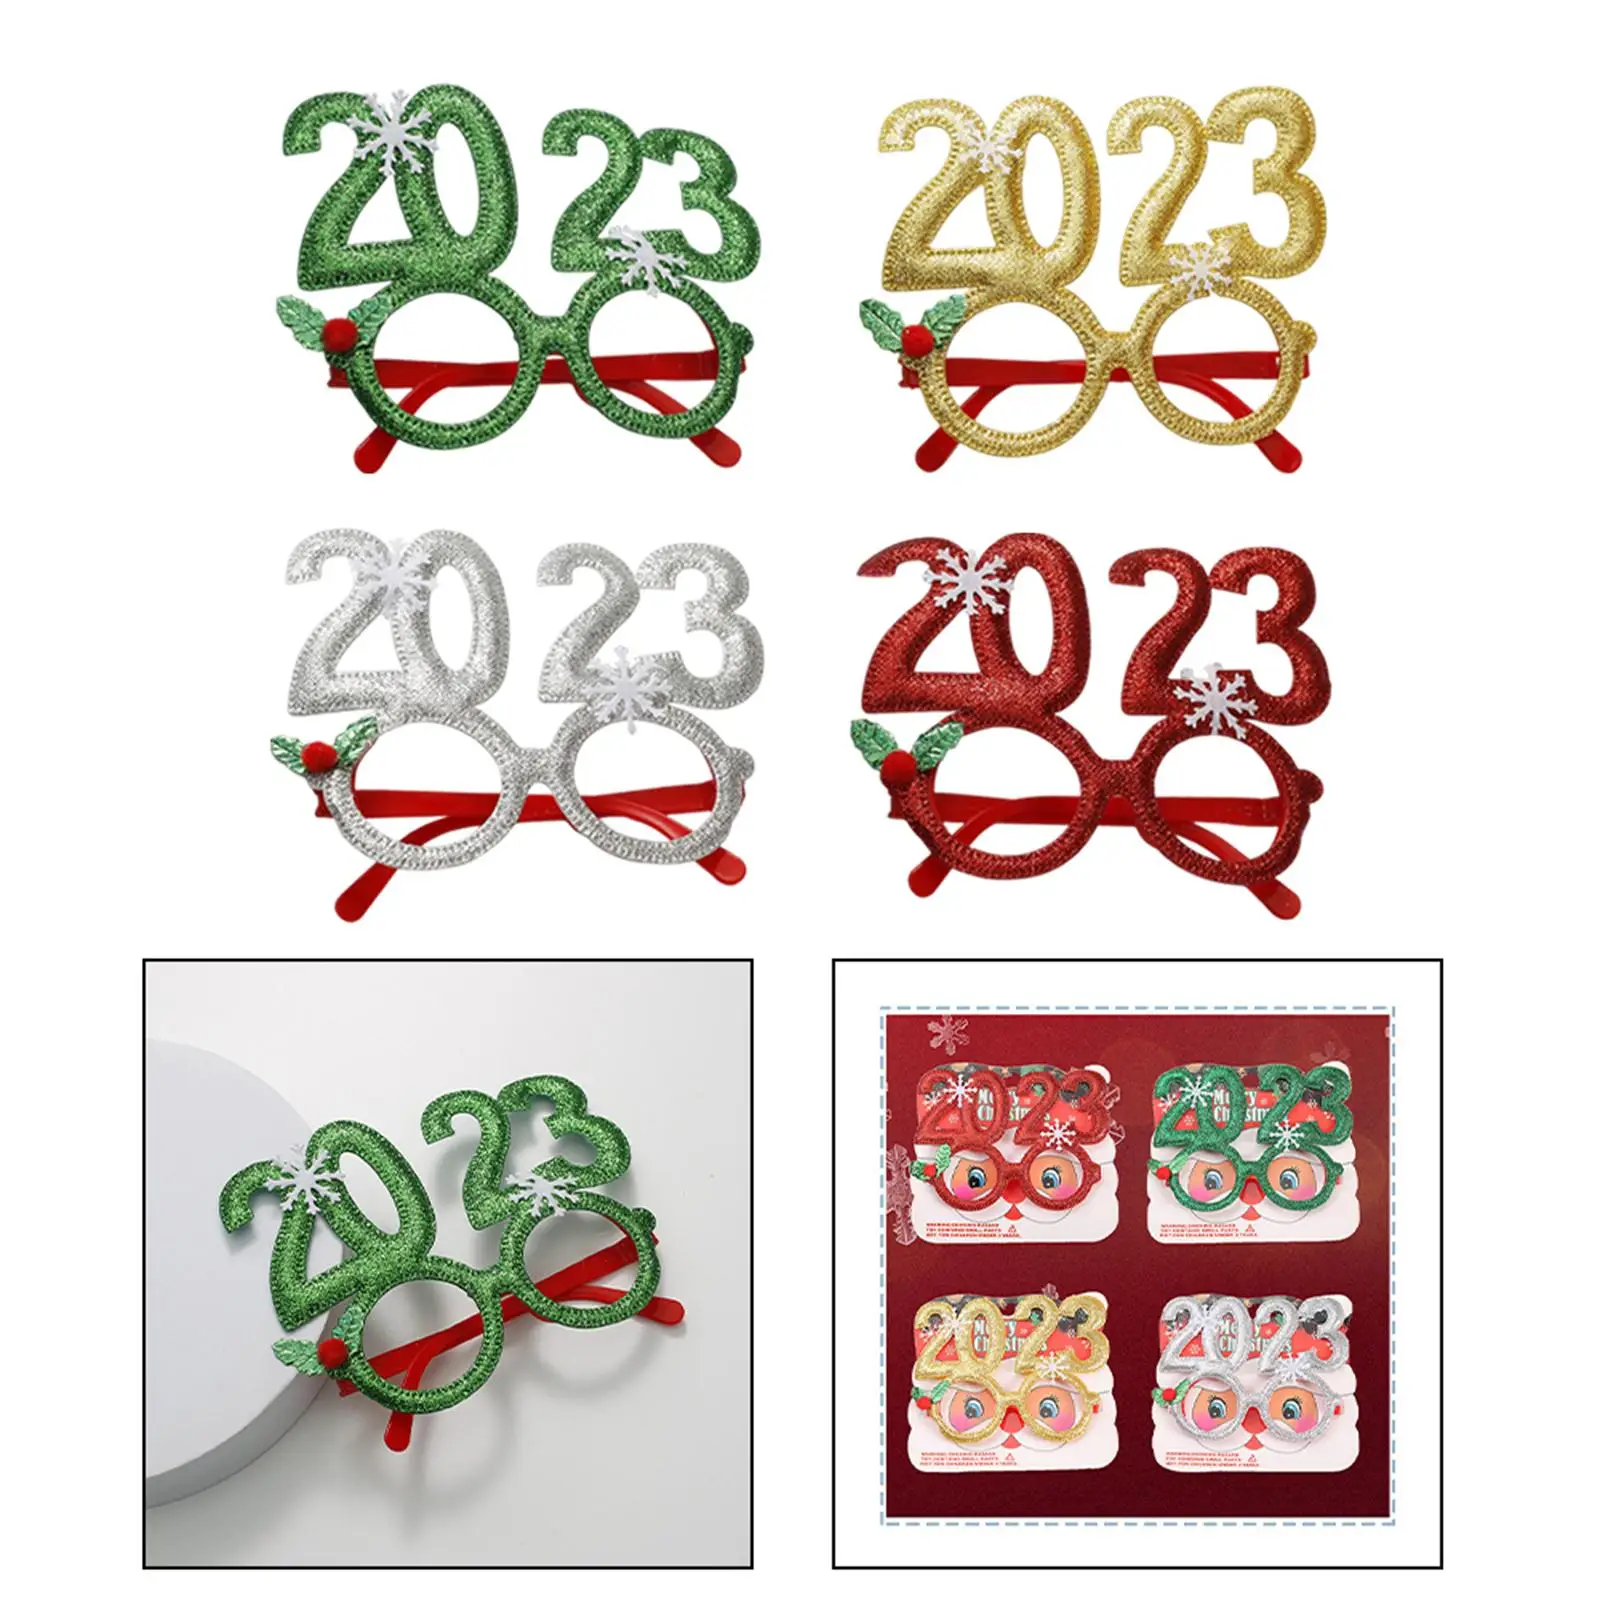 Christmas Glasses Photobooth Props Christmas Party Decor Party Favor cosplay glasses for Holiday Boys and Girls Kids Adults Gift